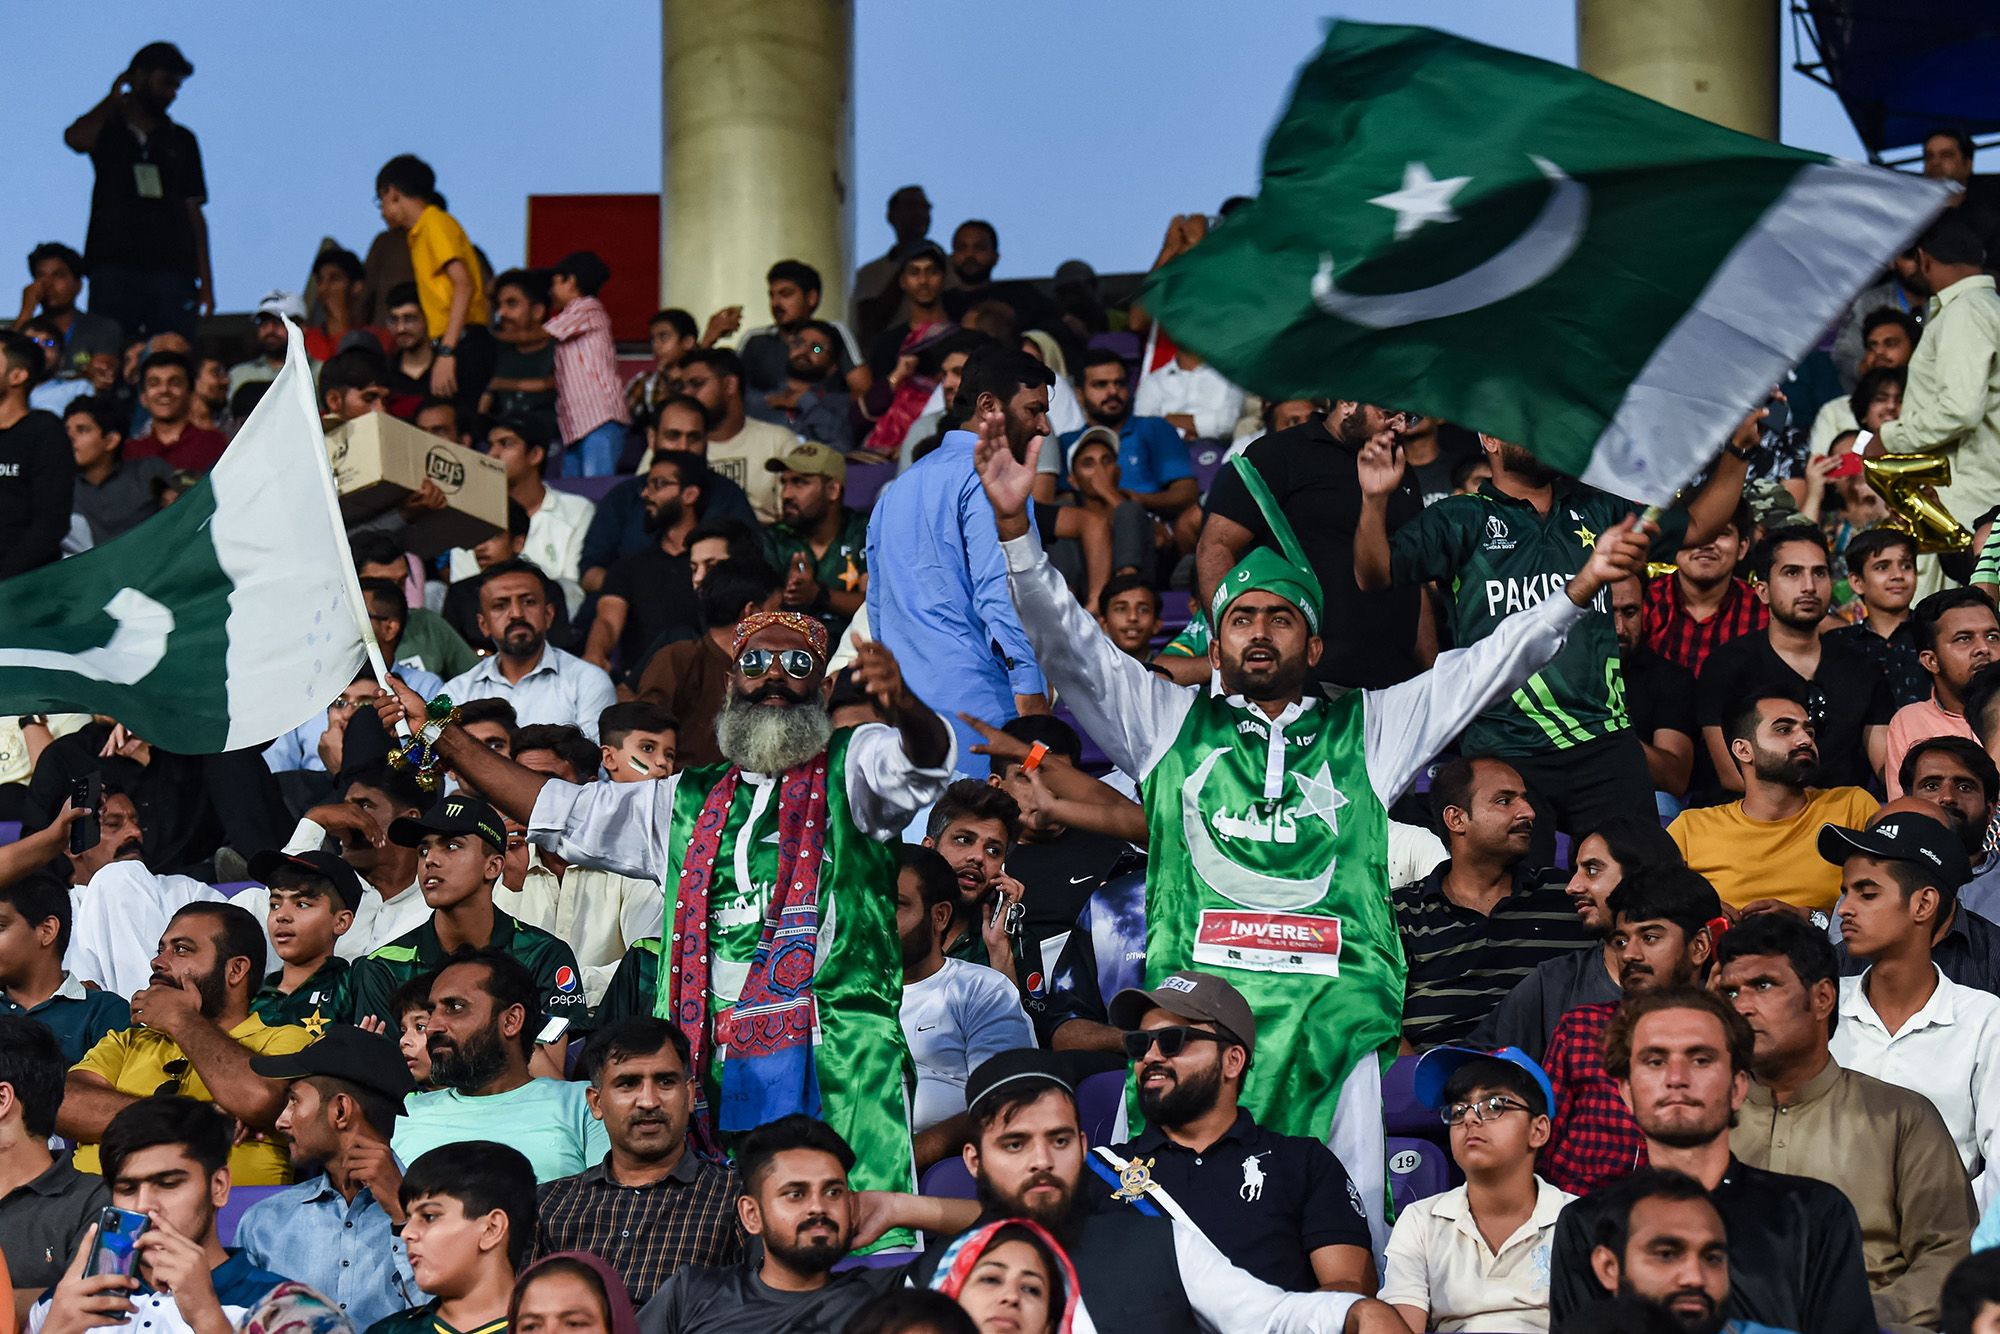 Five times the superbowl': Why India vs Pakistan in cricket is a sporting  rivalry like no other